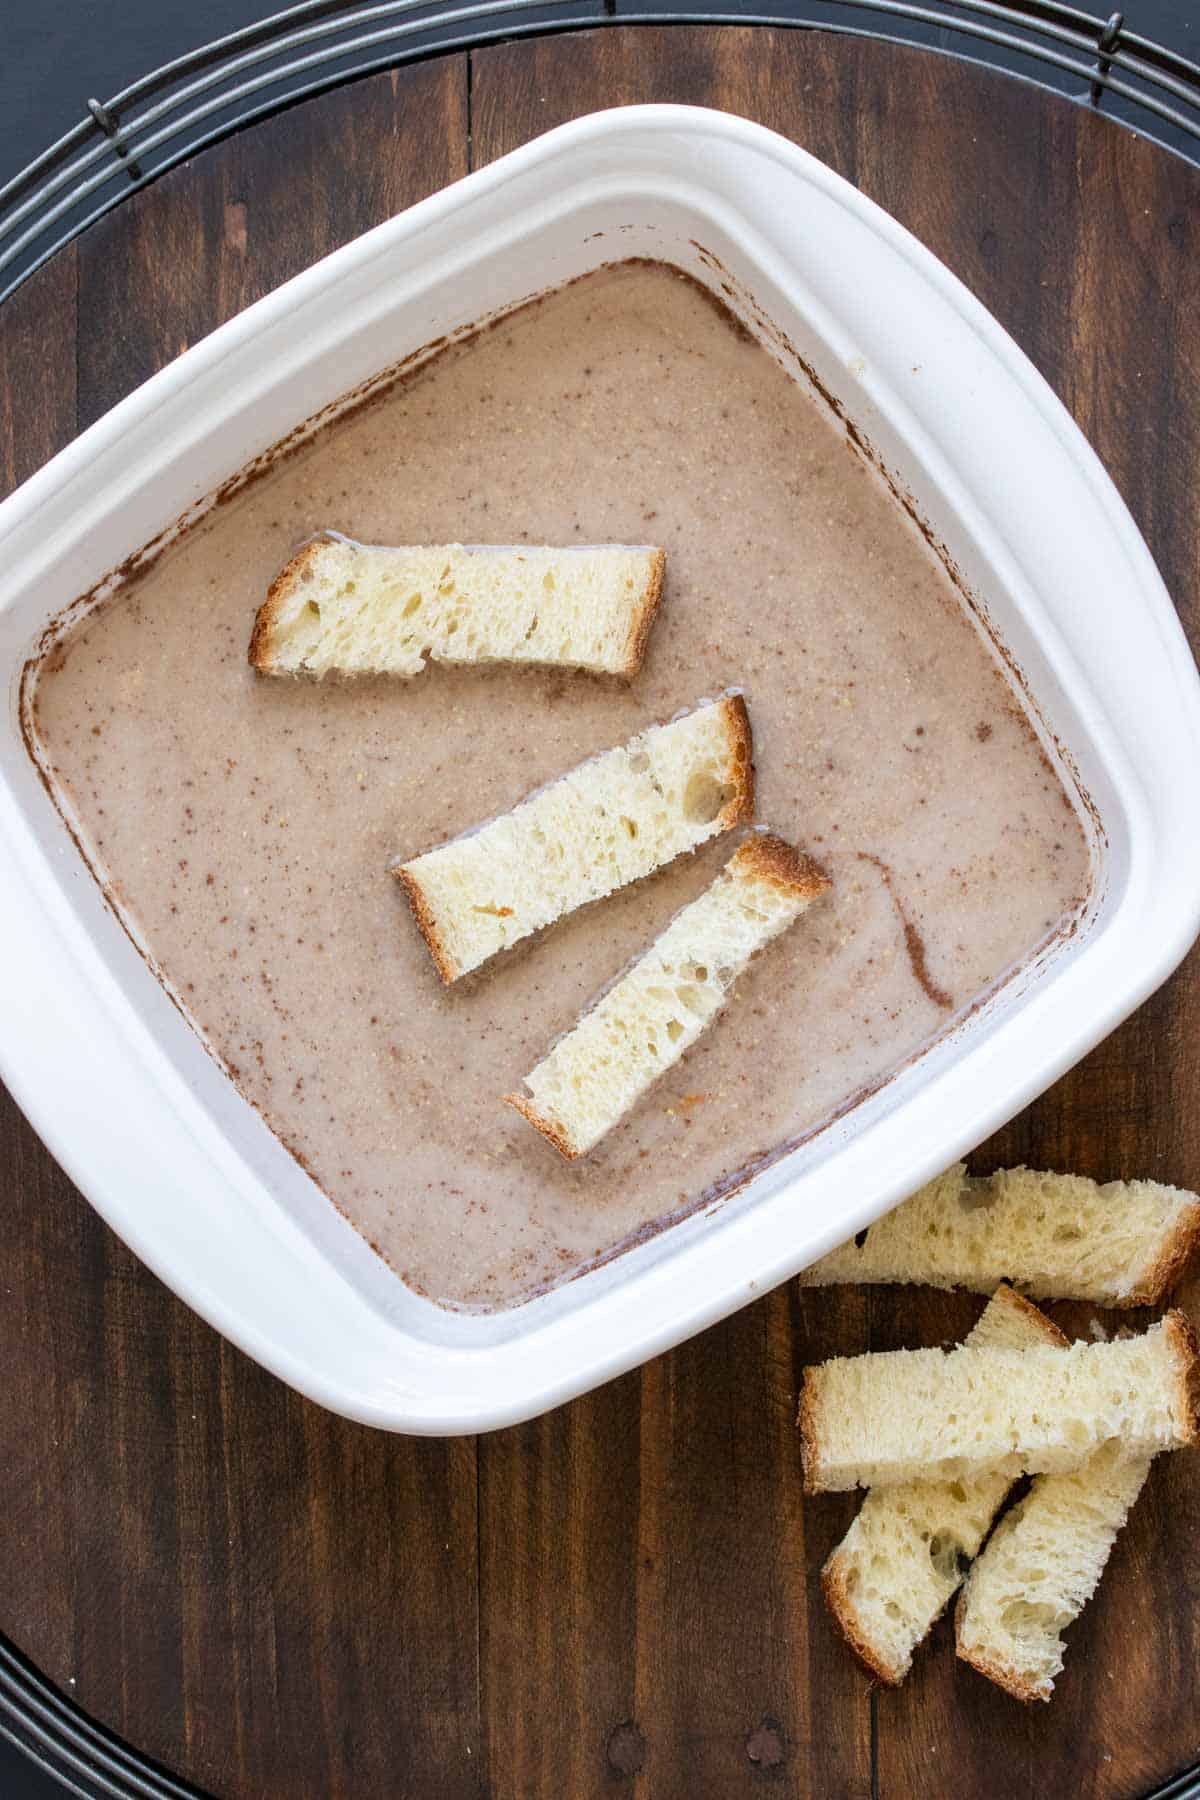 White baking dish with tan liquid and strips of bread soaking in